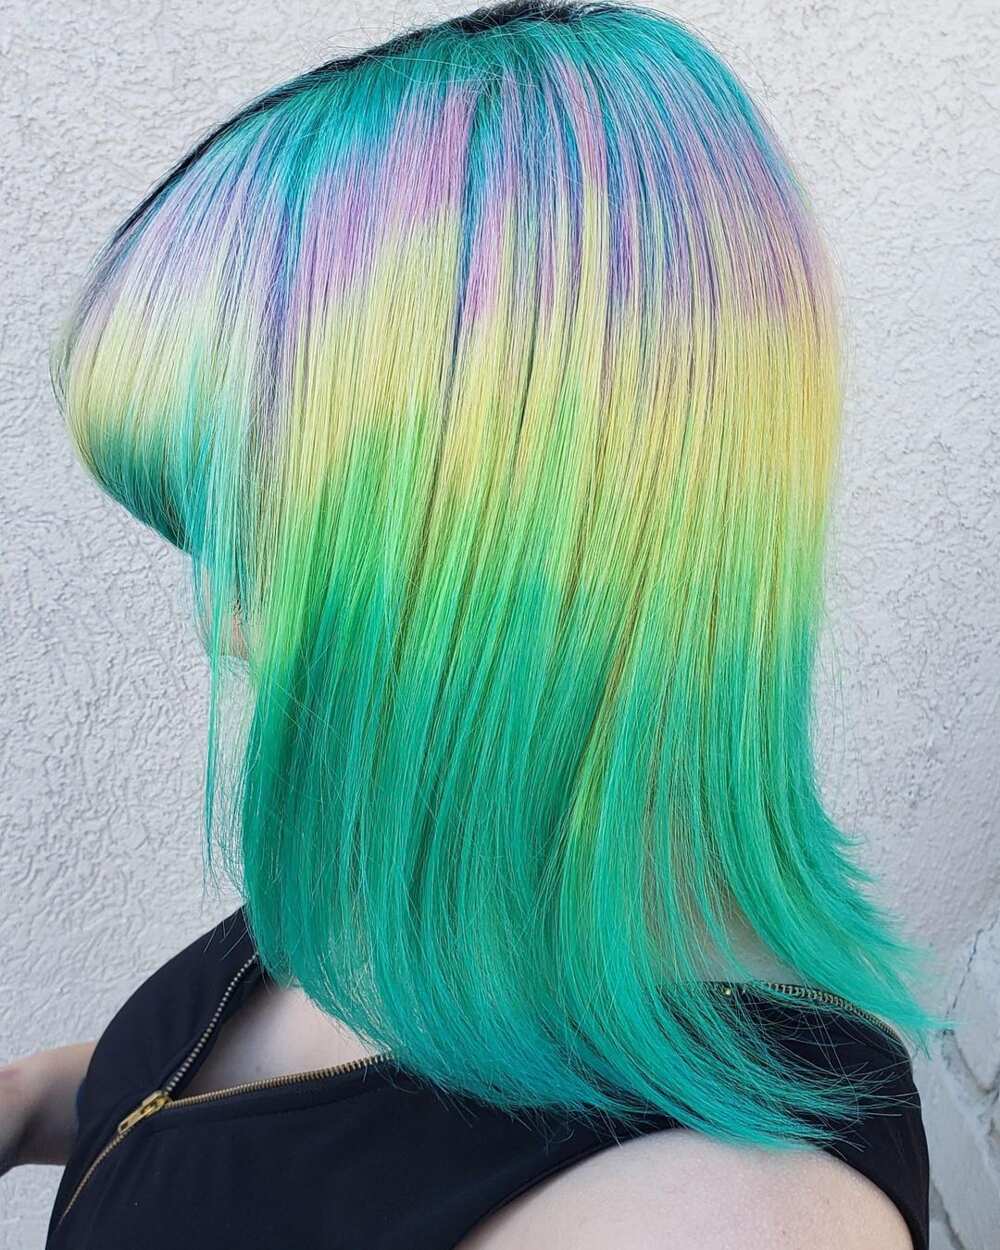 25 galaxy hair color ideas to try in 2019 Legit.ng